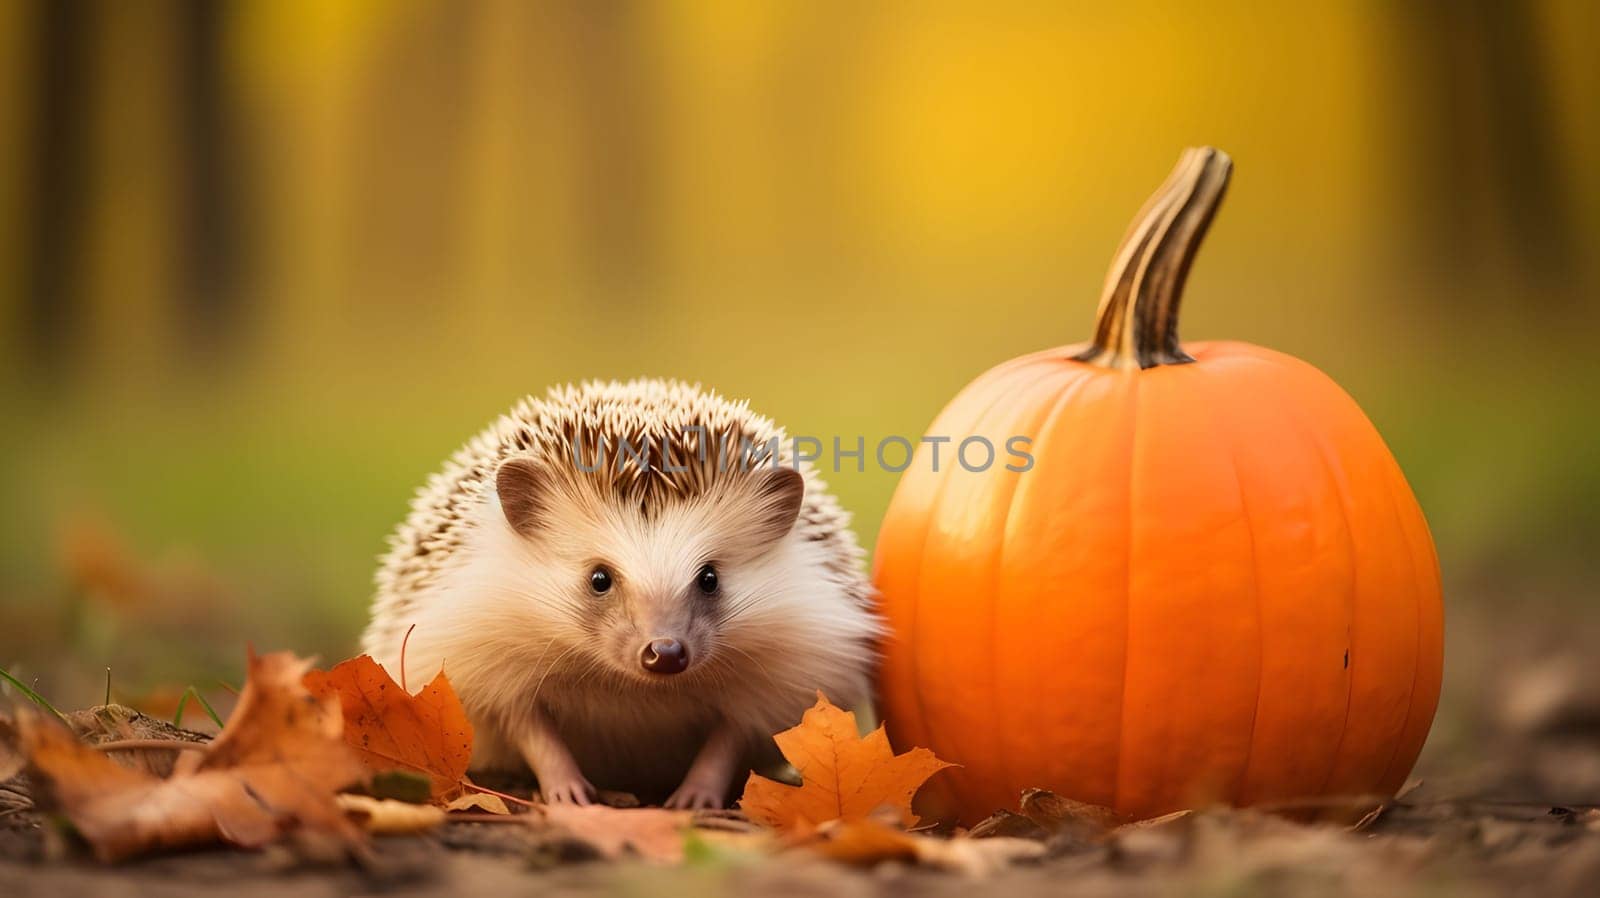 Hedgehog next to pumpkin on smudged background, Forest. Pumpkin as a dish of thanksgiving for the harvest. by ThemesS